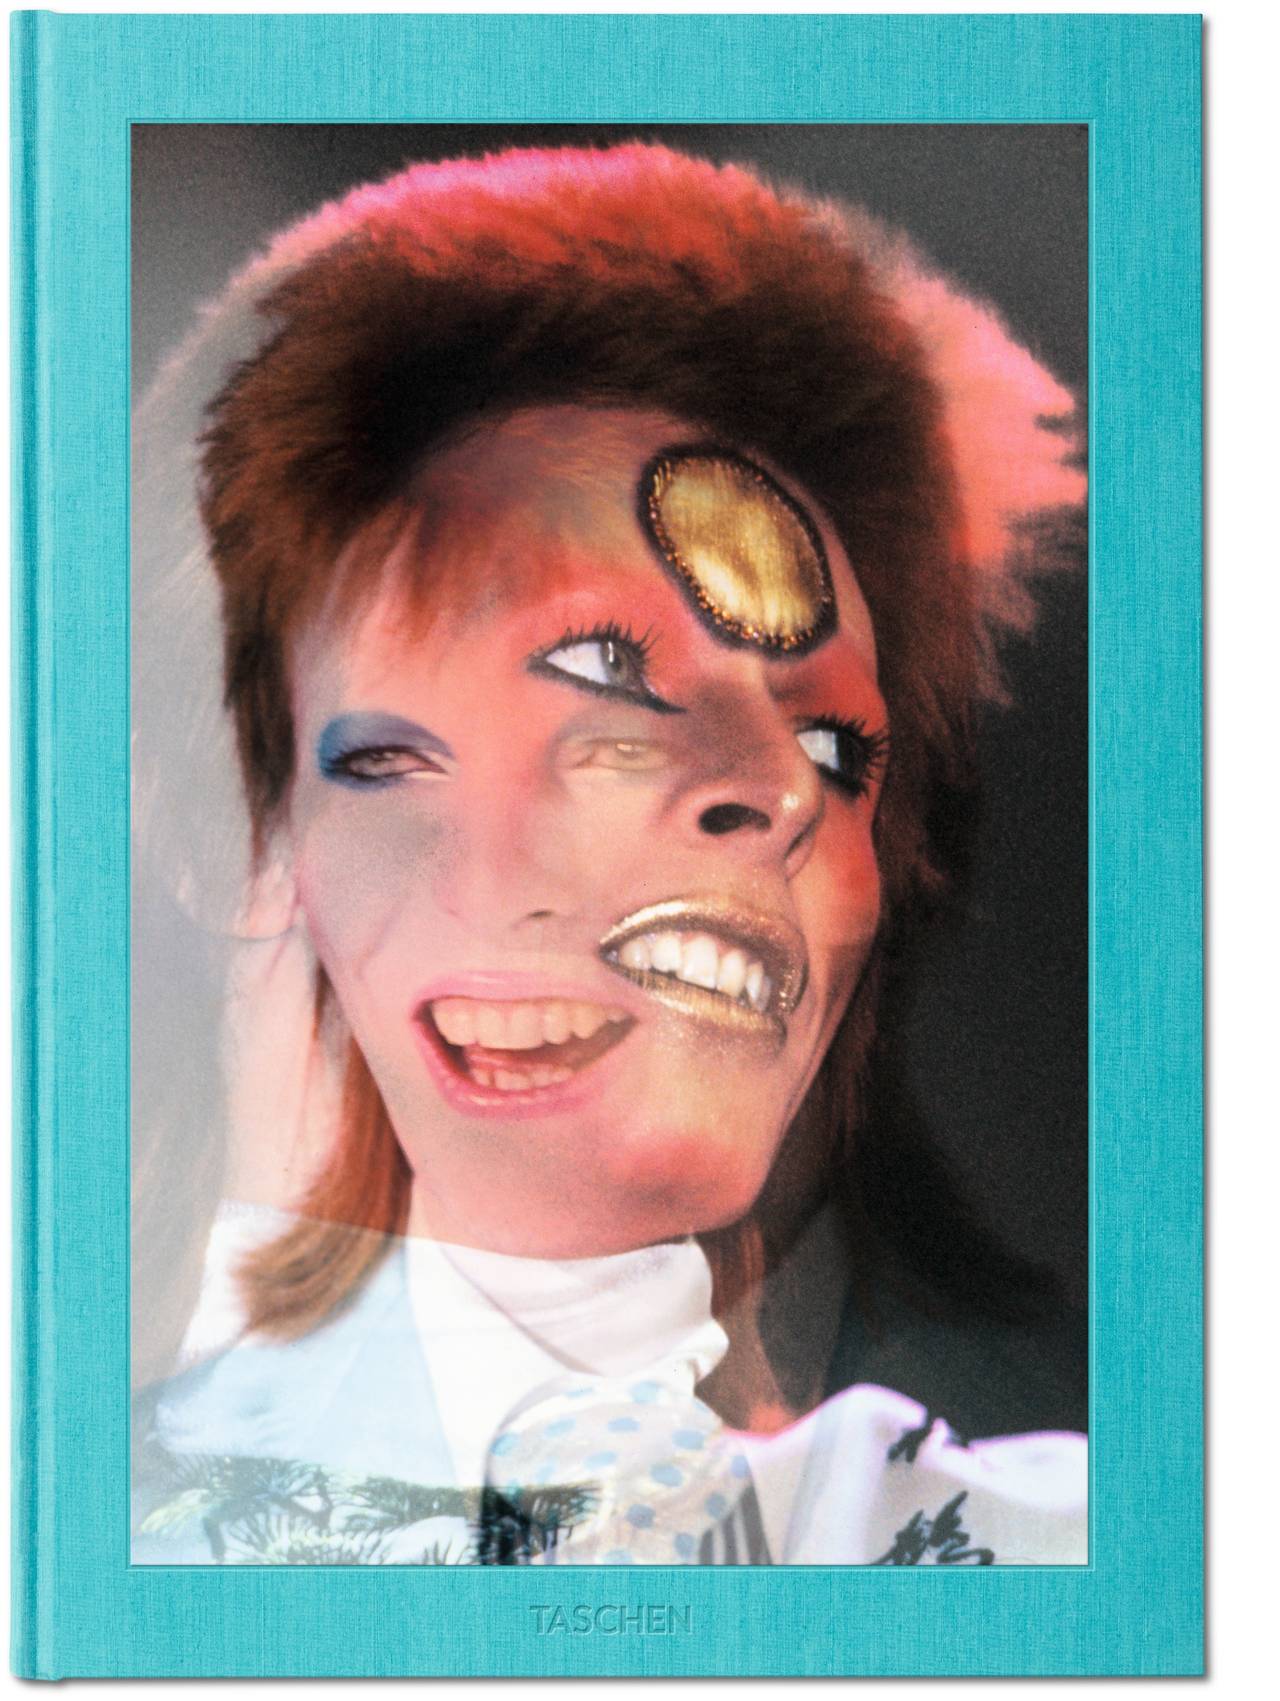 The Rise of David Bowie. 1972-1973. Art Edition A - Photograph by Mick Rock